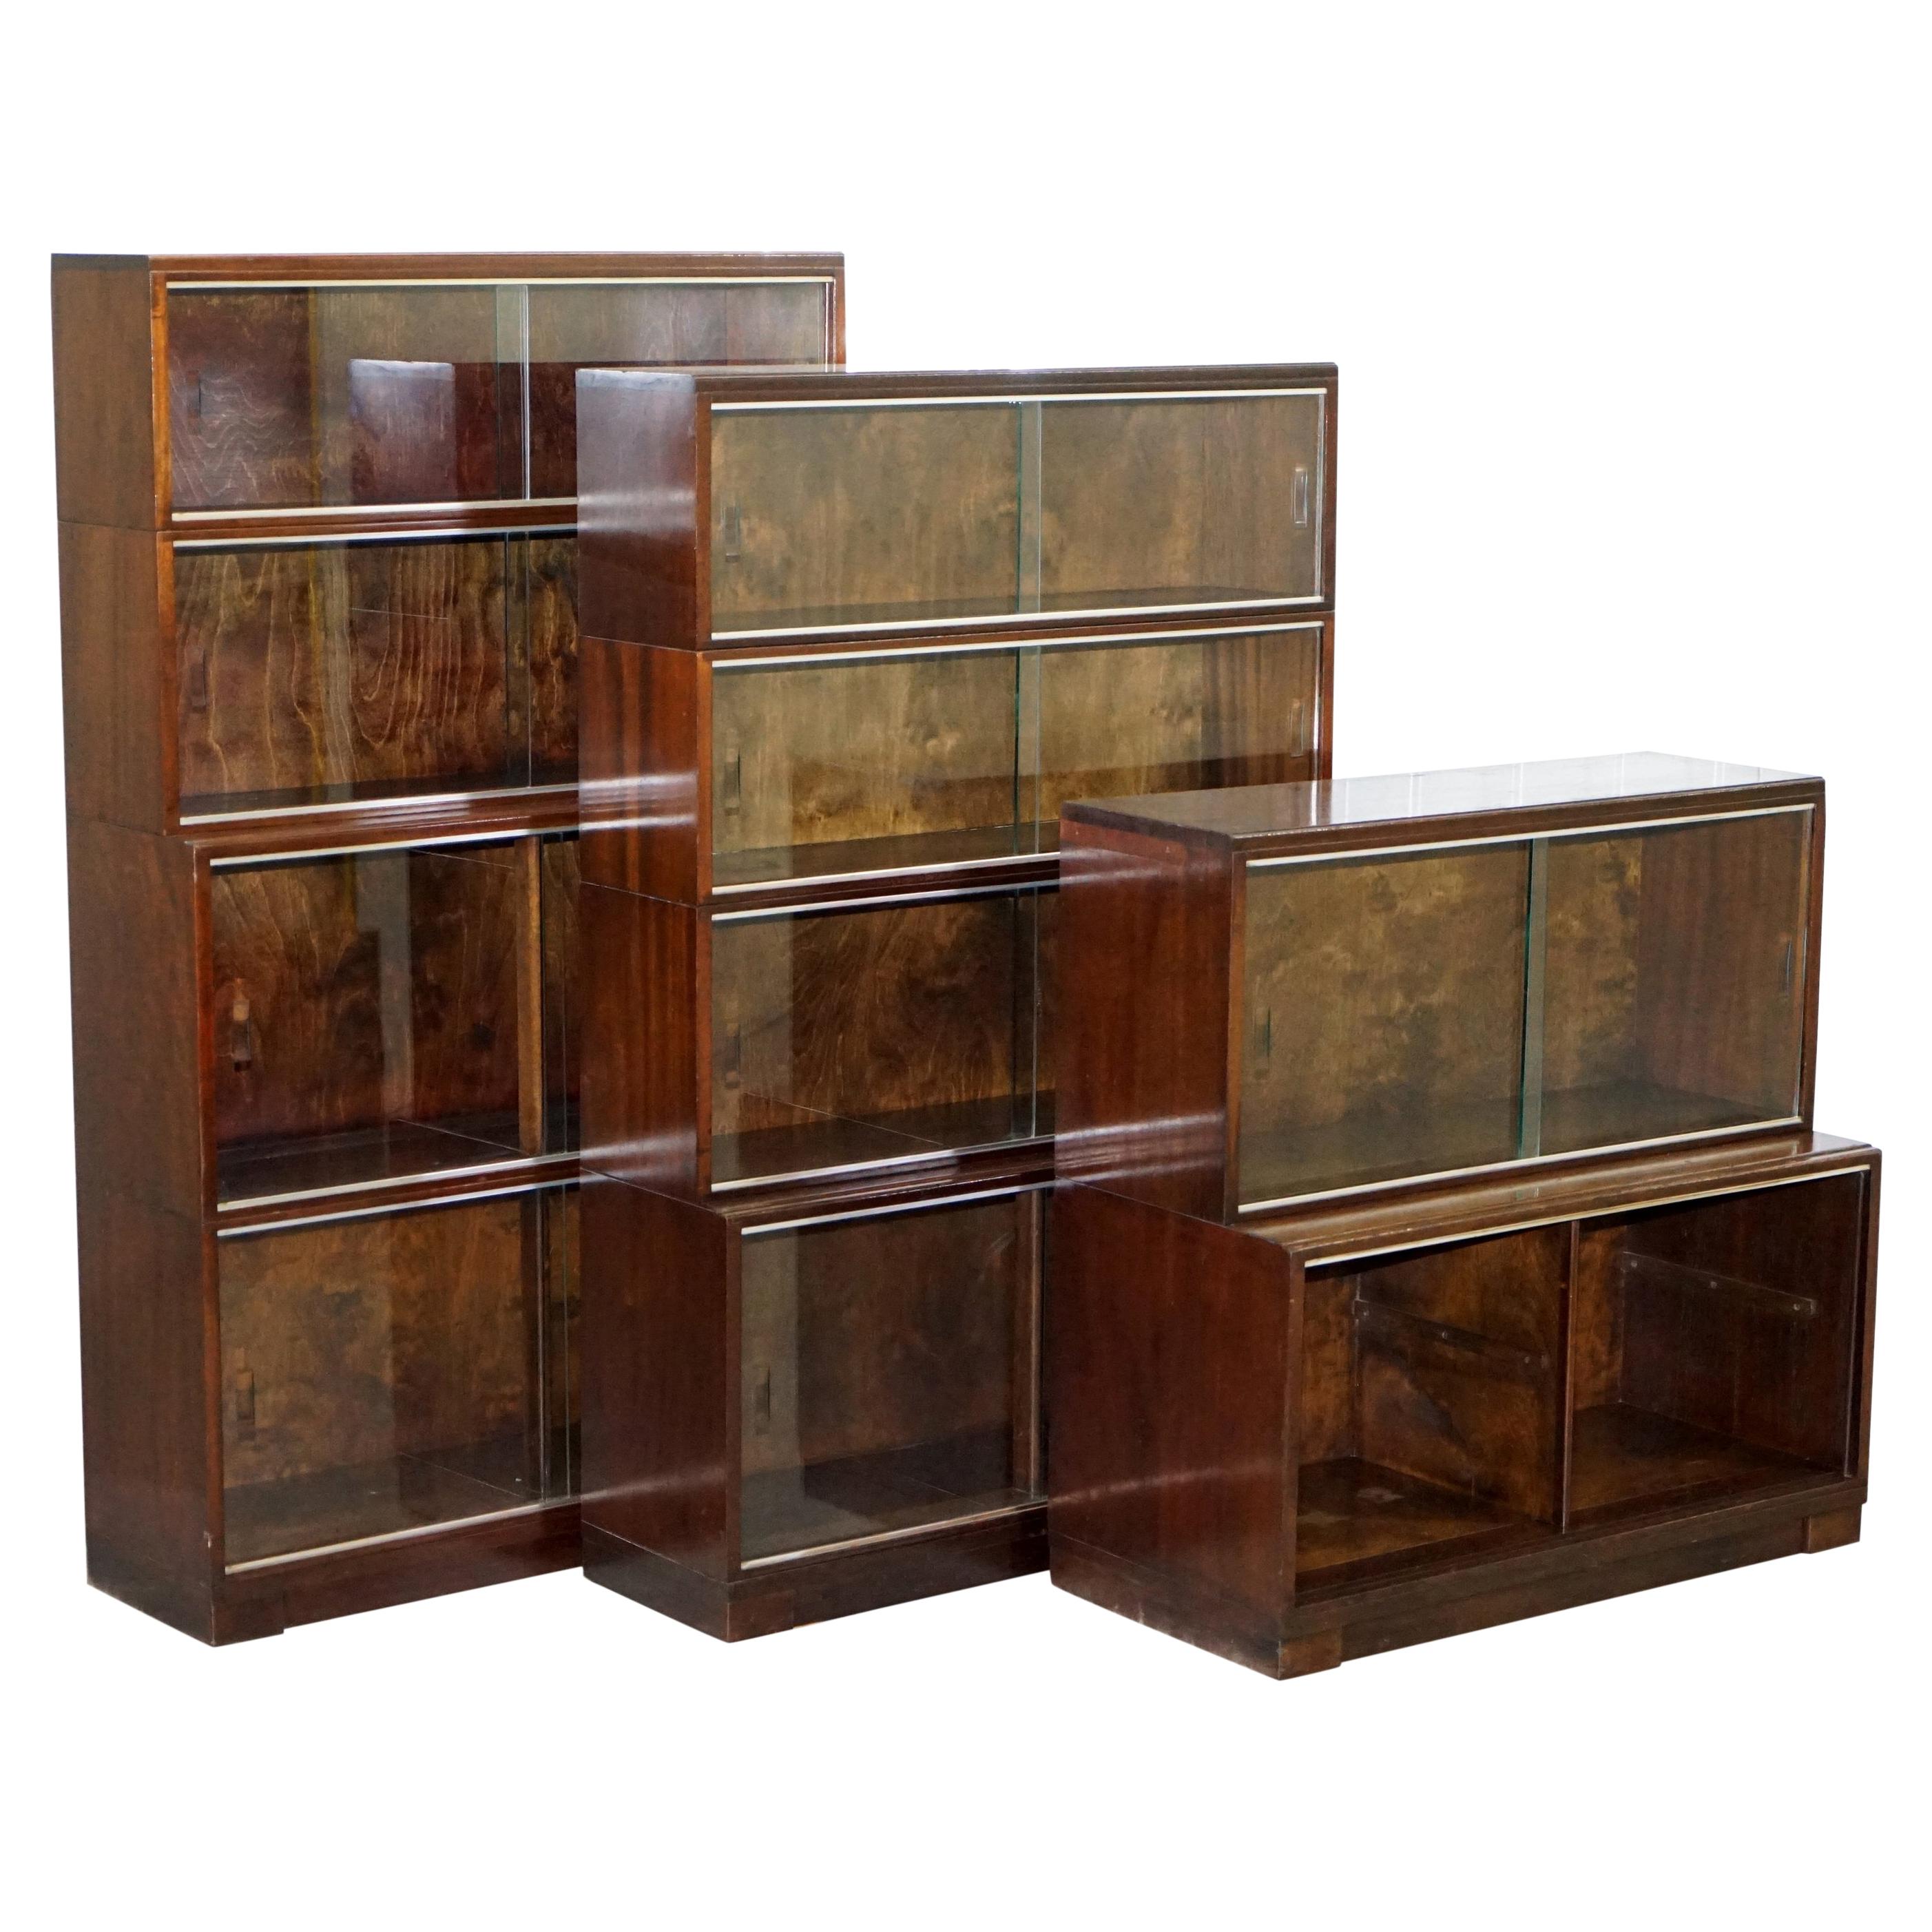 Legal Library Suite of Minty Oxford Modular Stacking Mahogany Library Bookcases